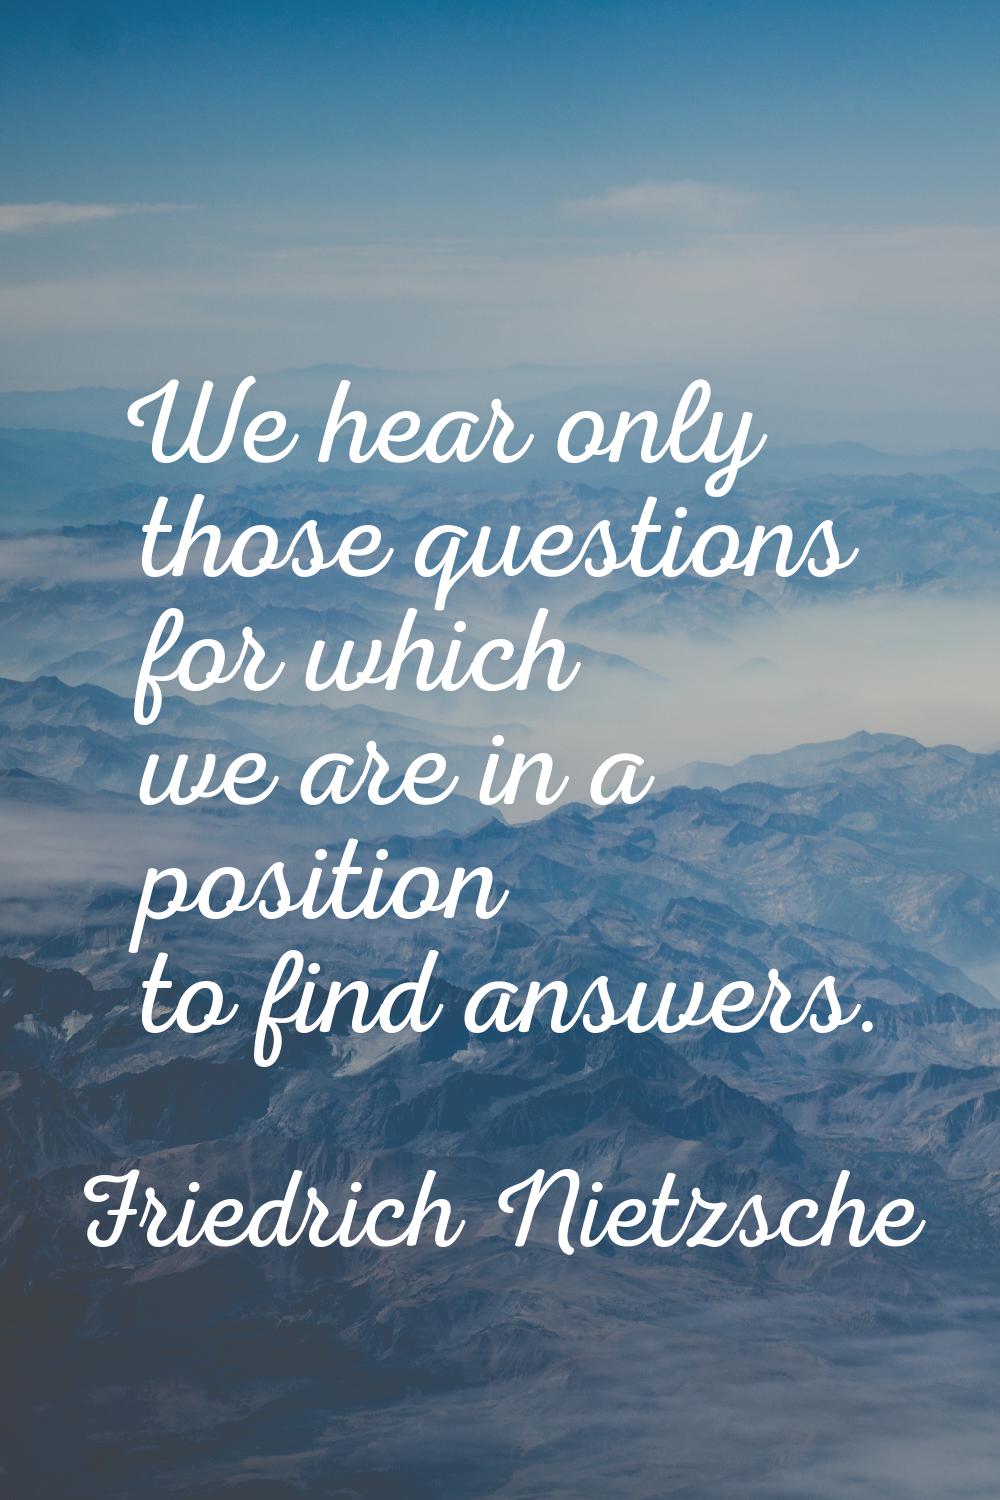 We hear only those questions for which we are in a position to find answers.